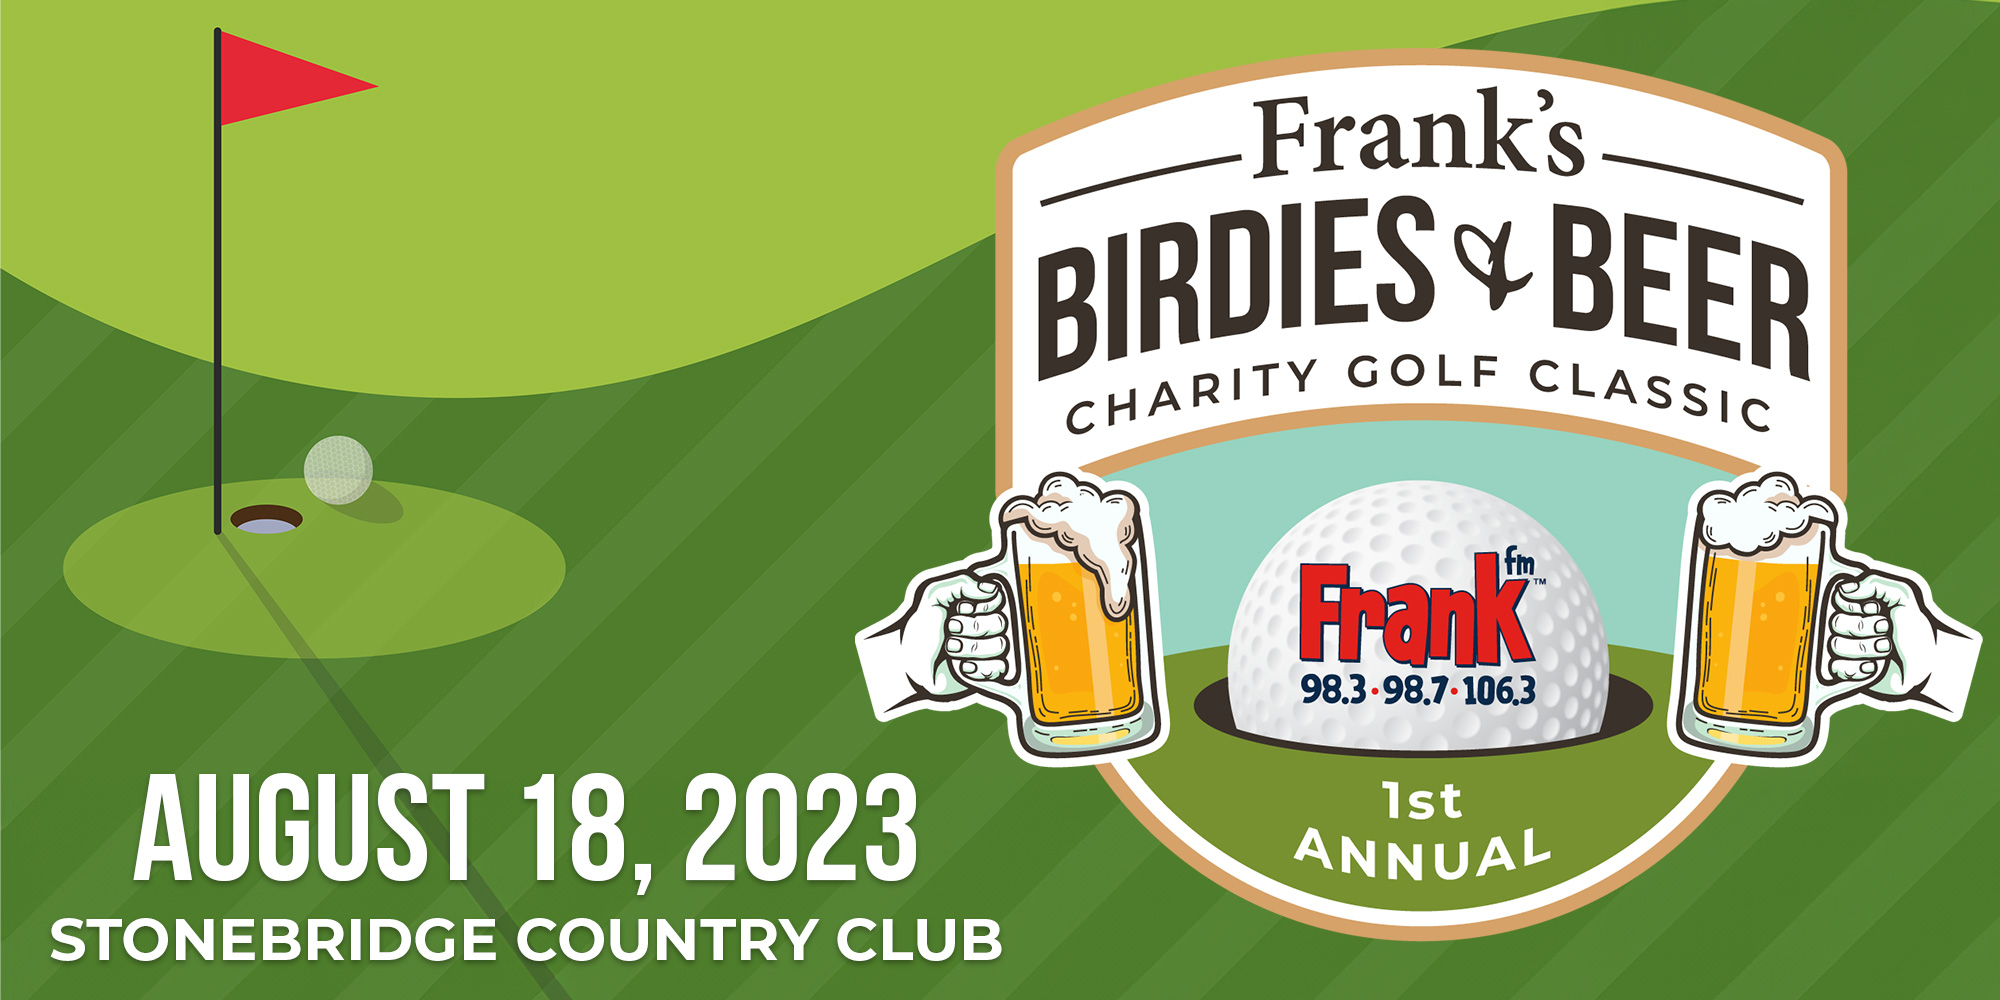 Frank’s Birdies & Beer Charity Golf Classic Raises Over $4,500 for Caring & Sharing